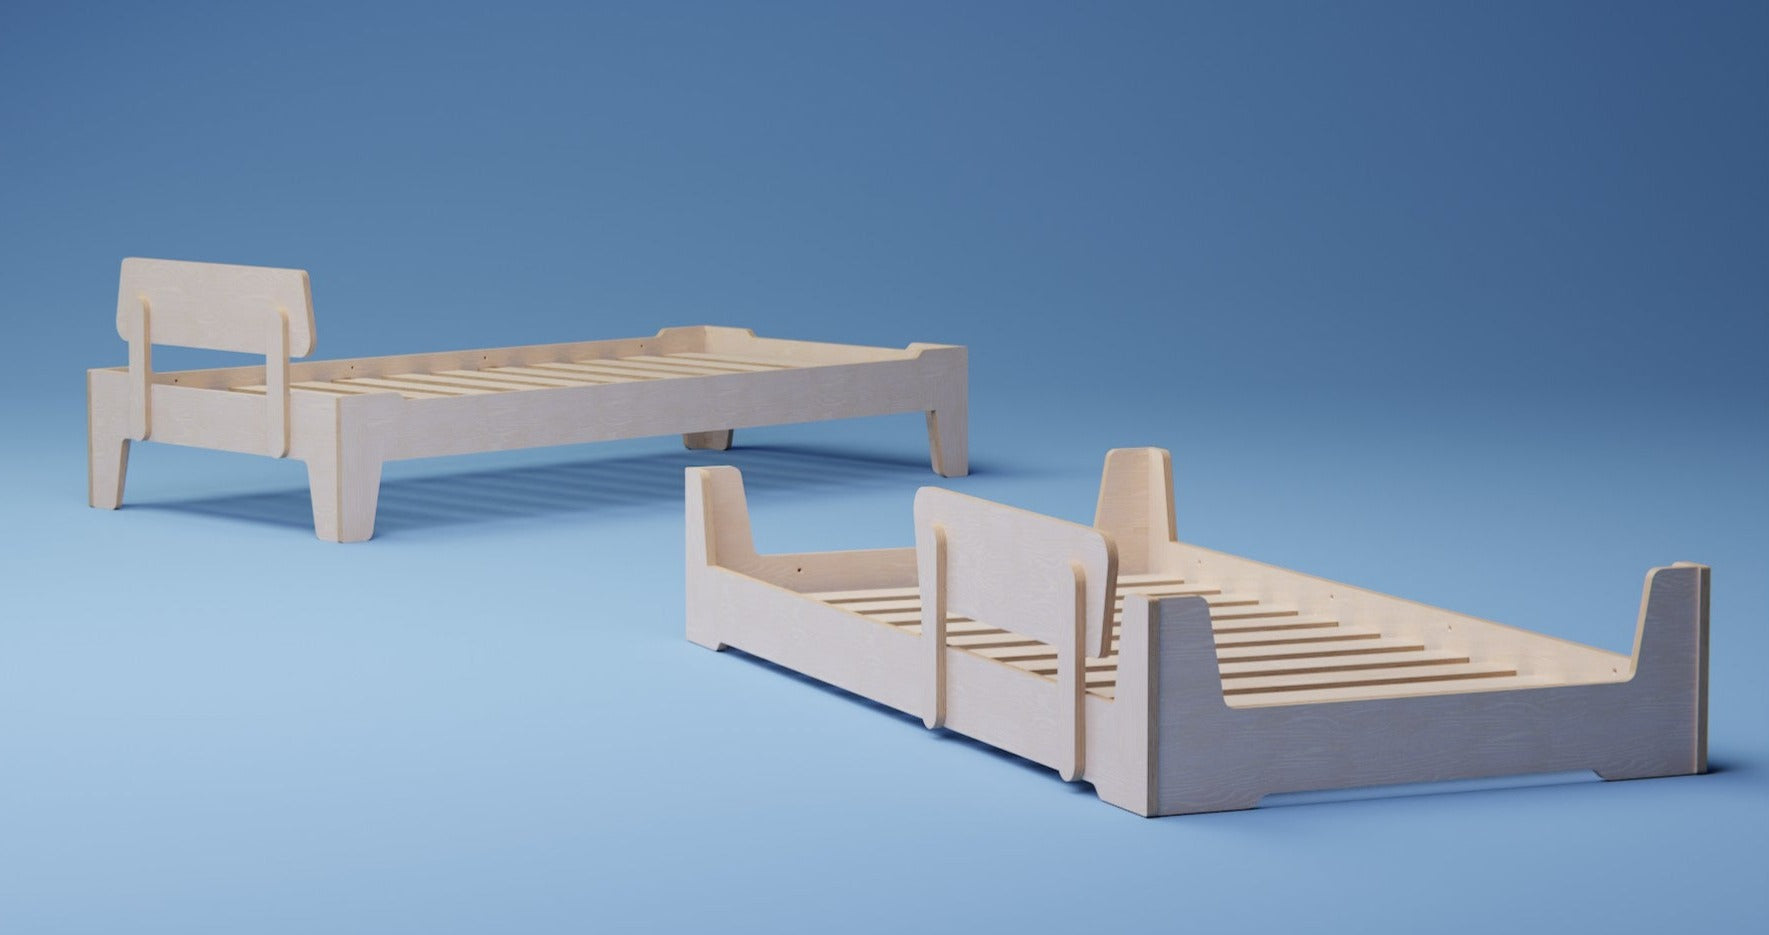 Experience the versatility of our flippable kids bed frame, inspired by the Montessori philosophy.